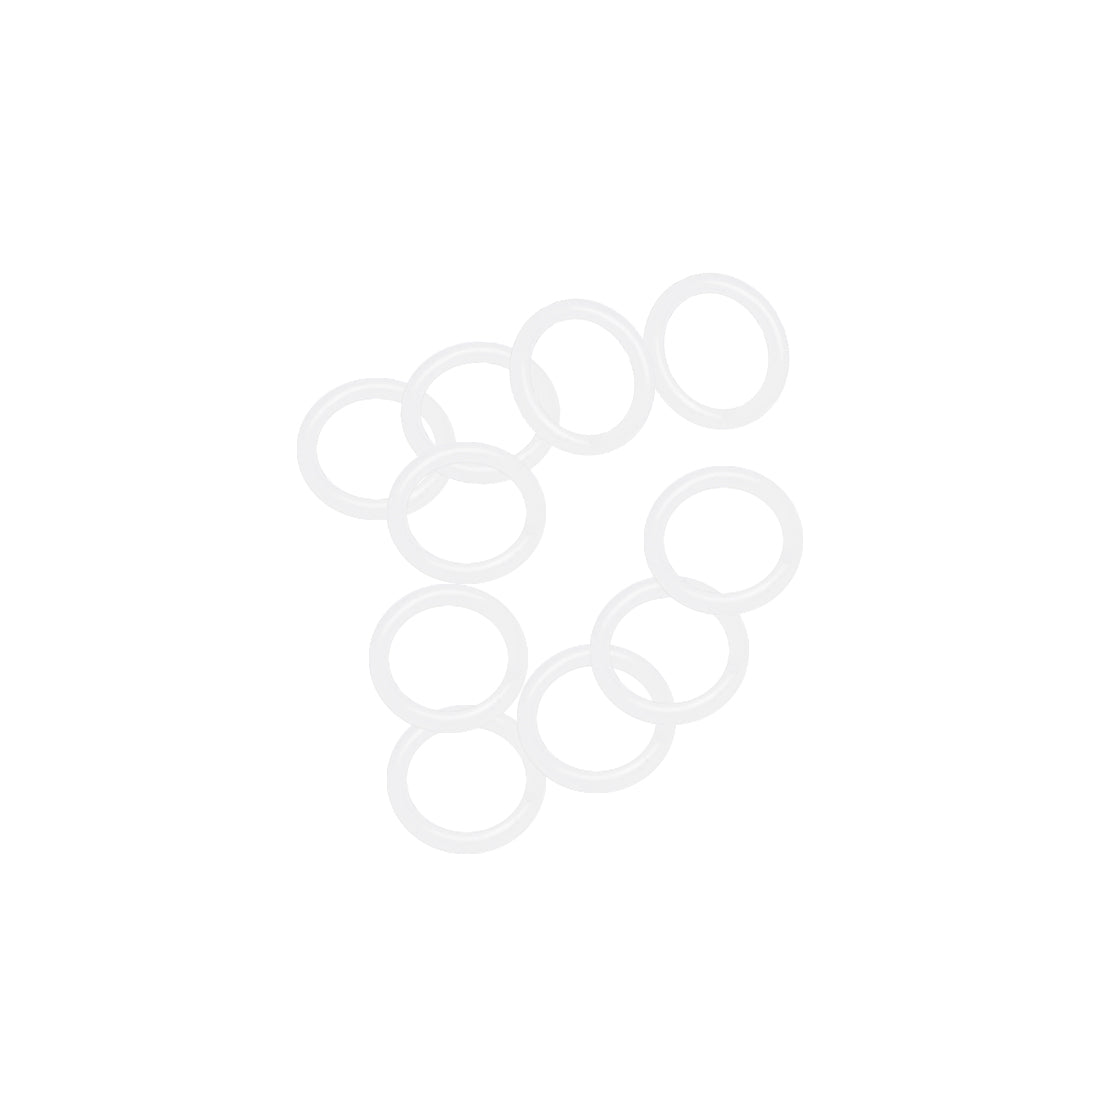 uxcell Uxcell Silicone O-Rings 17mm OD, 12.2mm ID, 2.4mm Width, Seal Gasket White 10Pcs